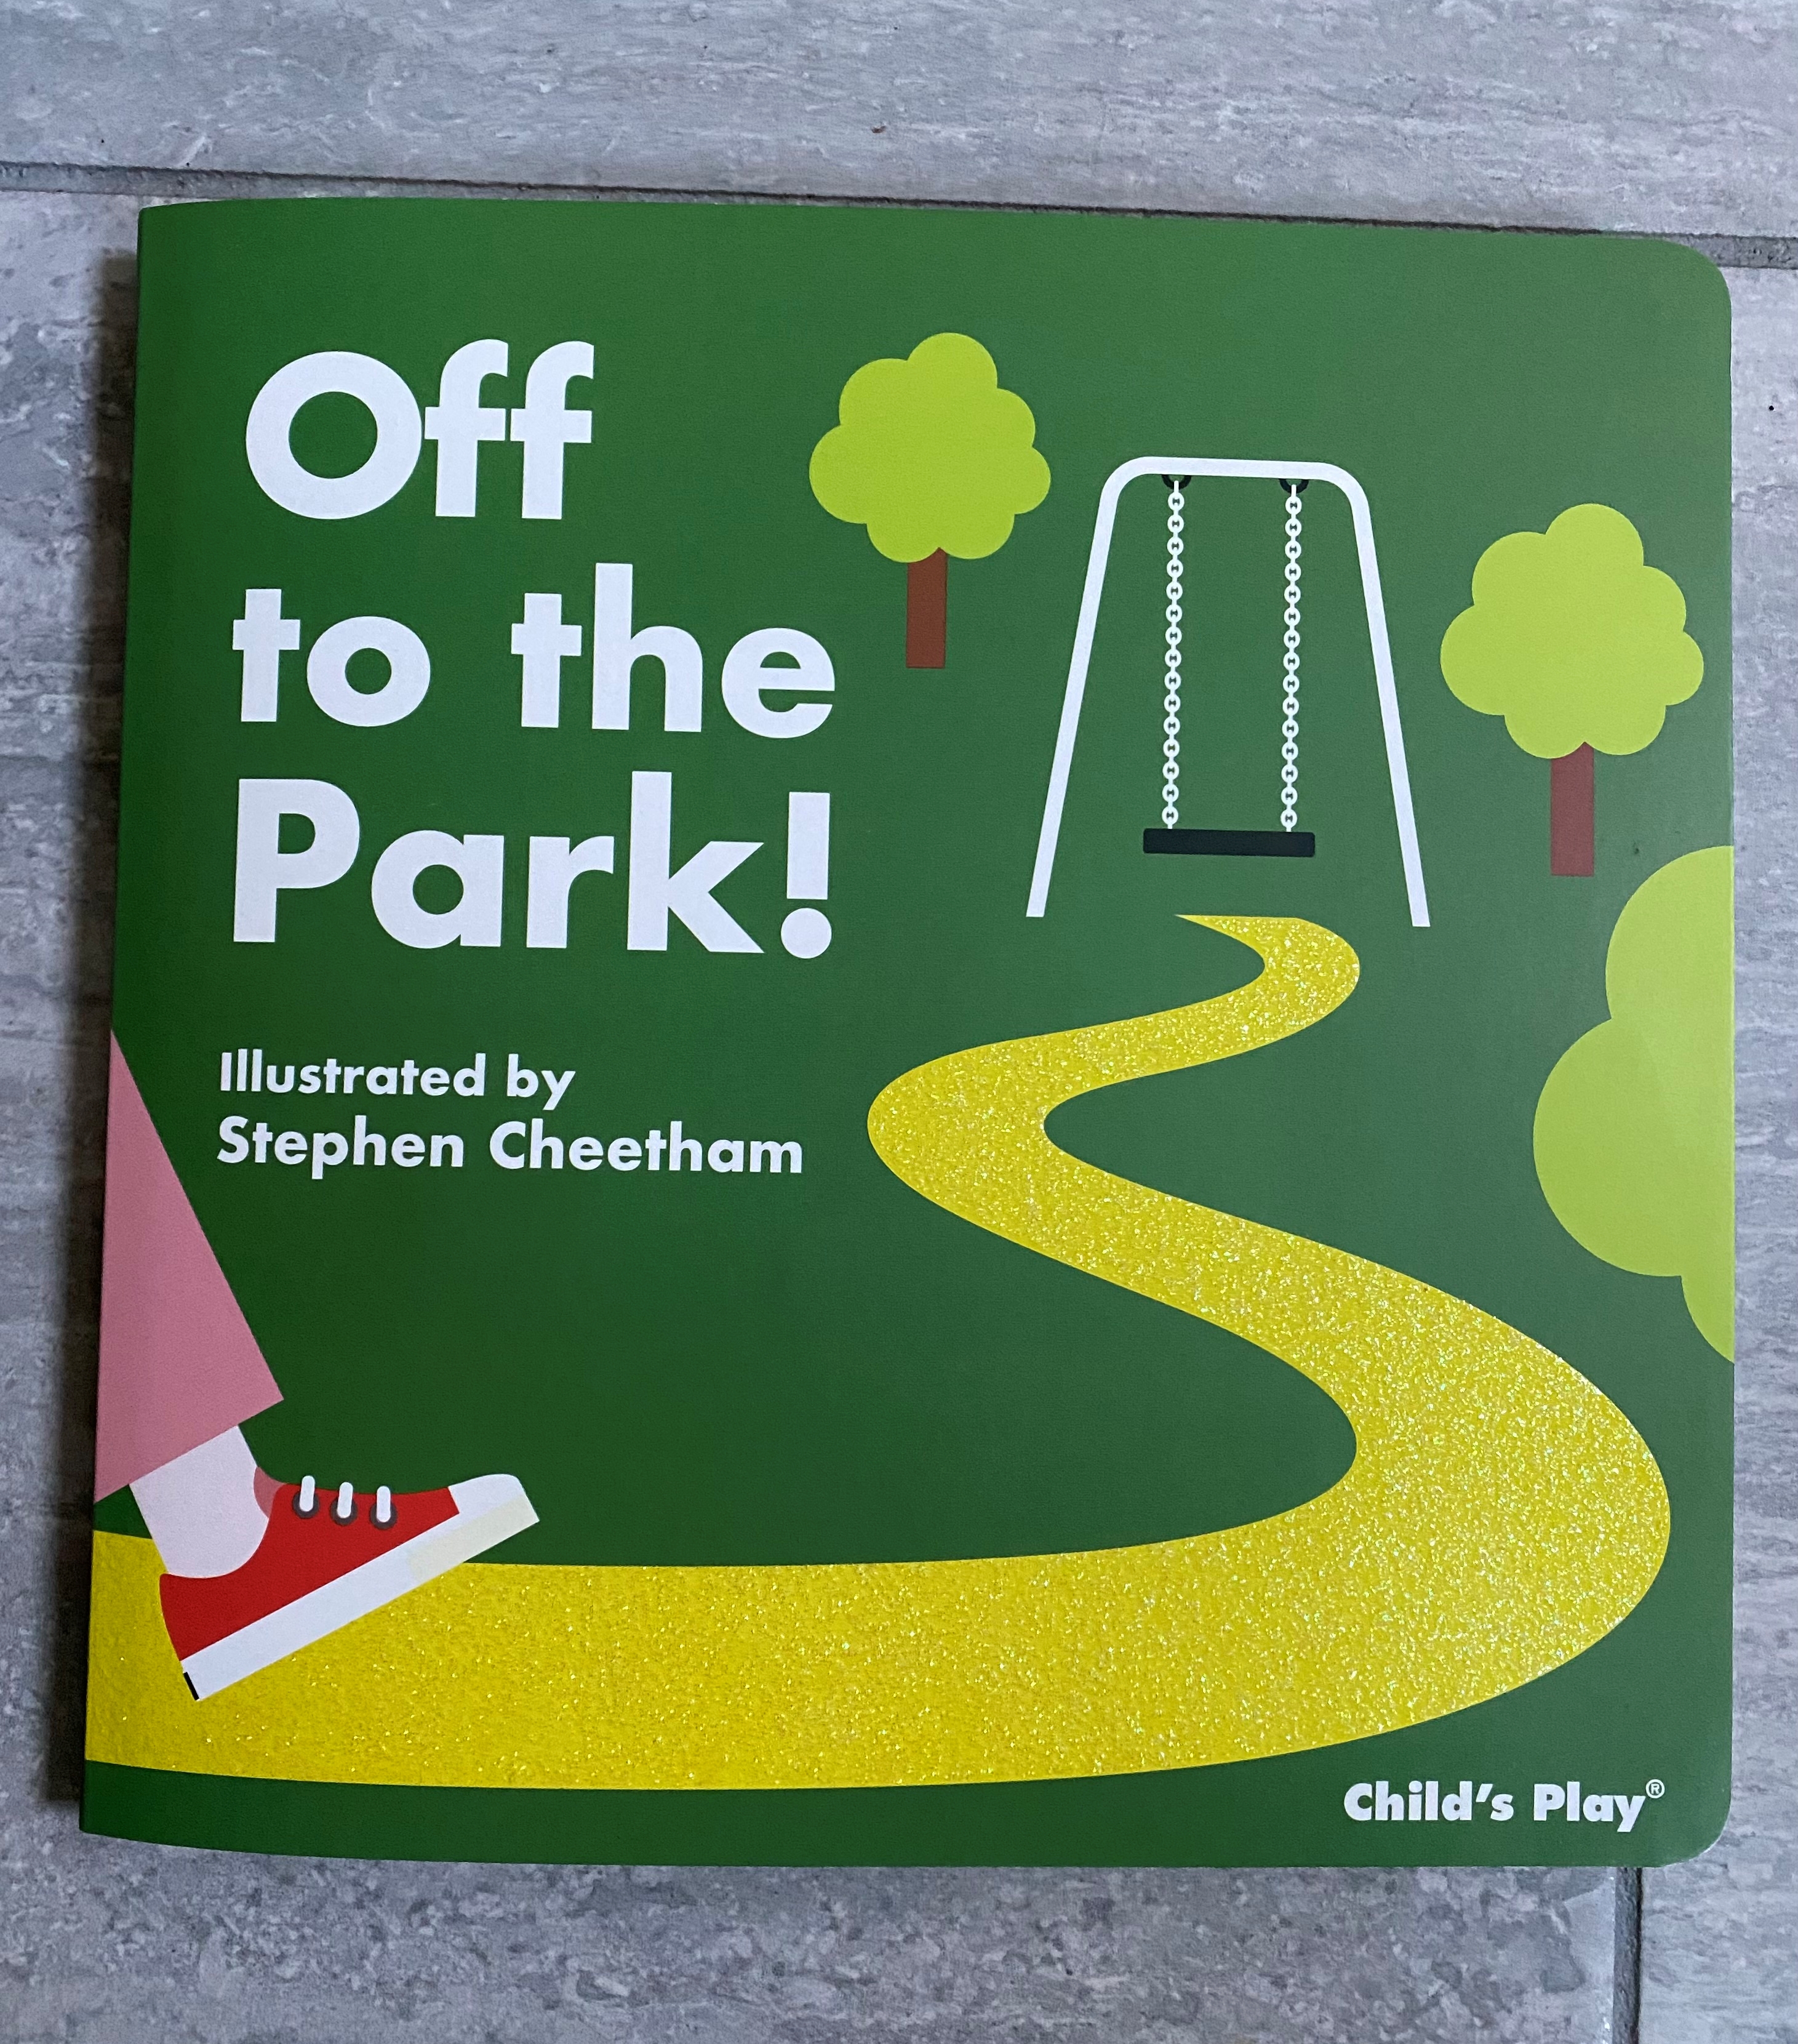 Book Cover of Off to the Park with a picture of a path with a leg walking to the playground swing